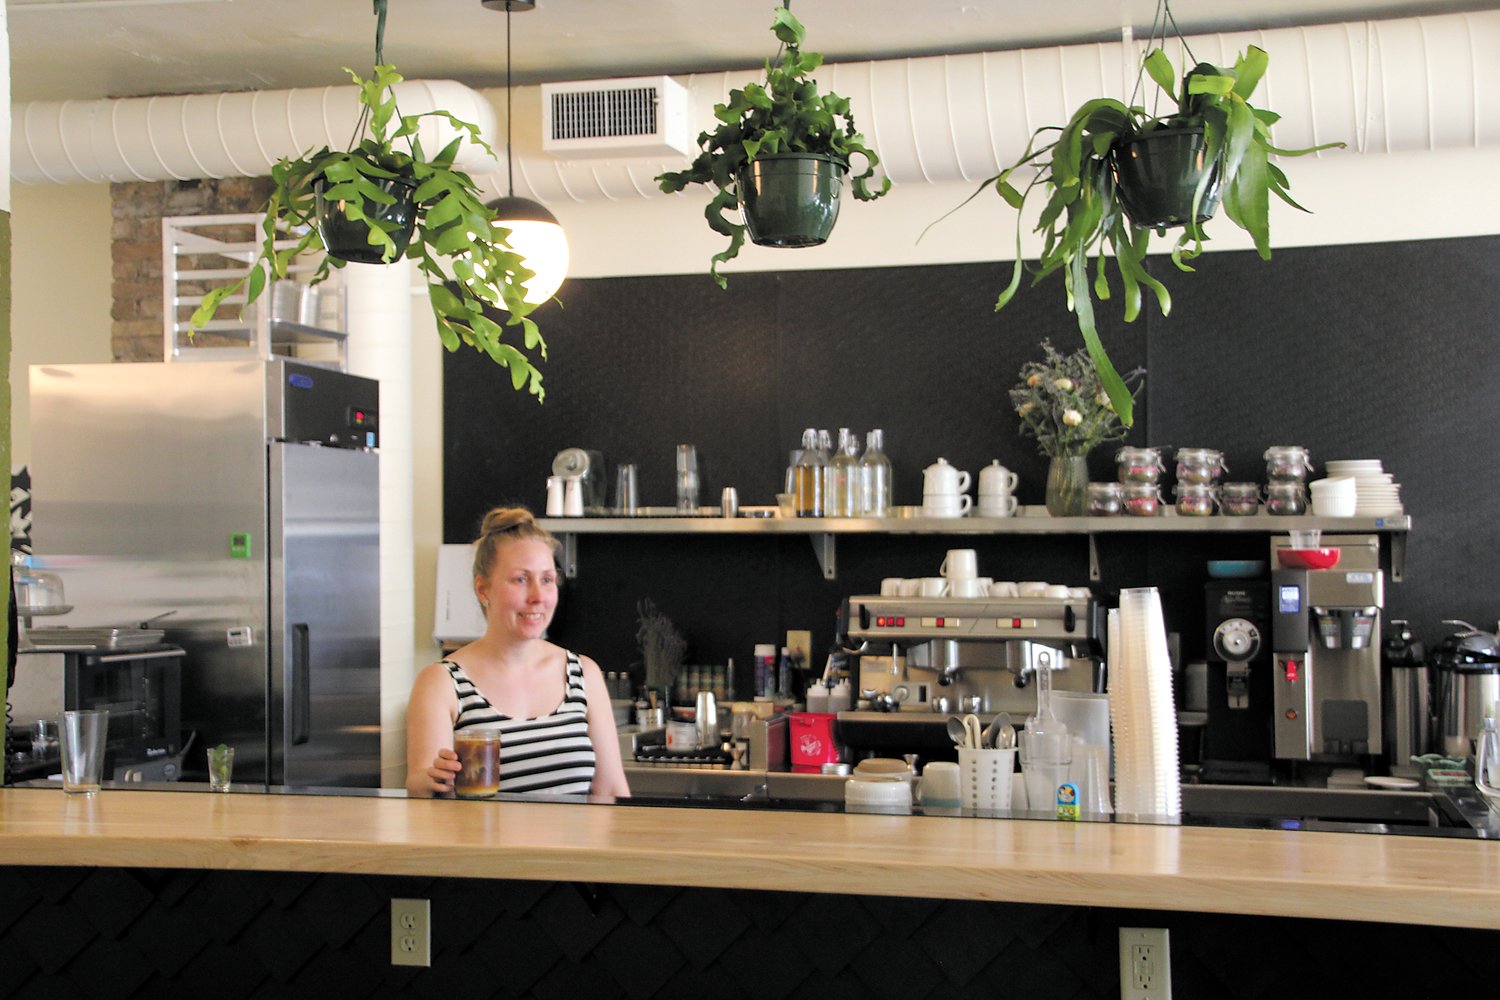 Brenda Ingersoll has staffed many of the hours at Milkweed herself since the pandemic began, but has recently brought on new staff members. (Archives)